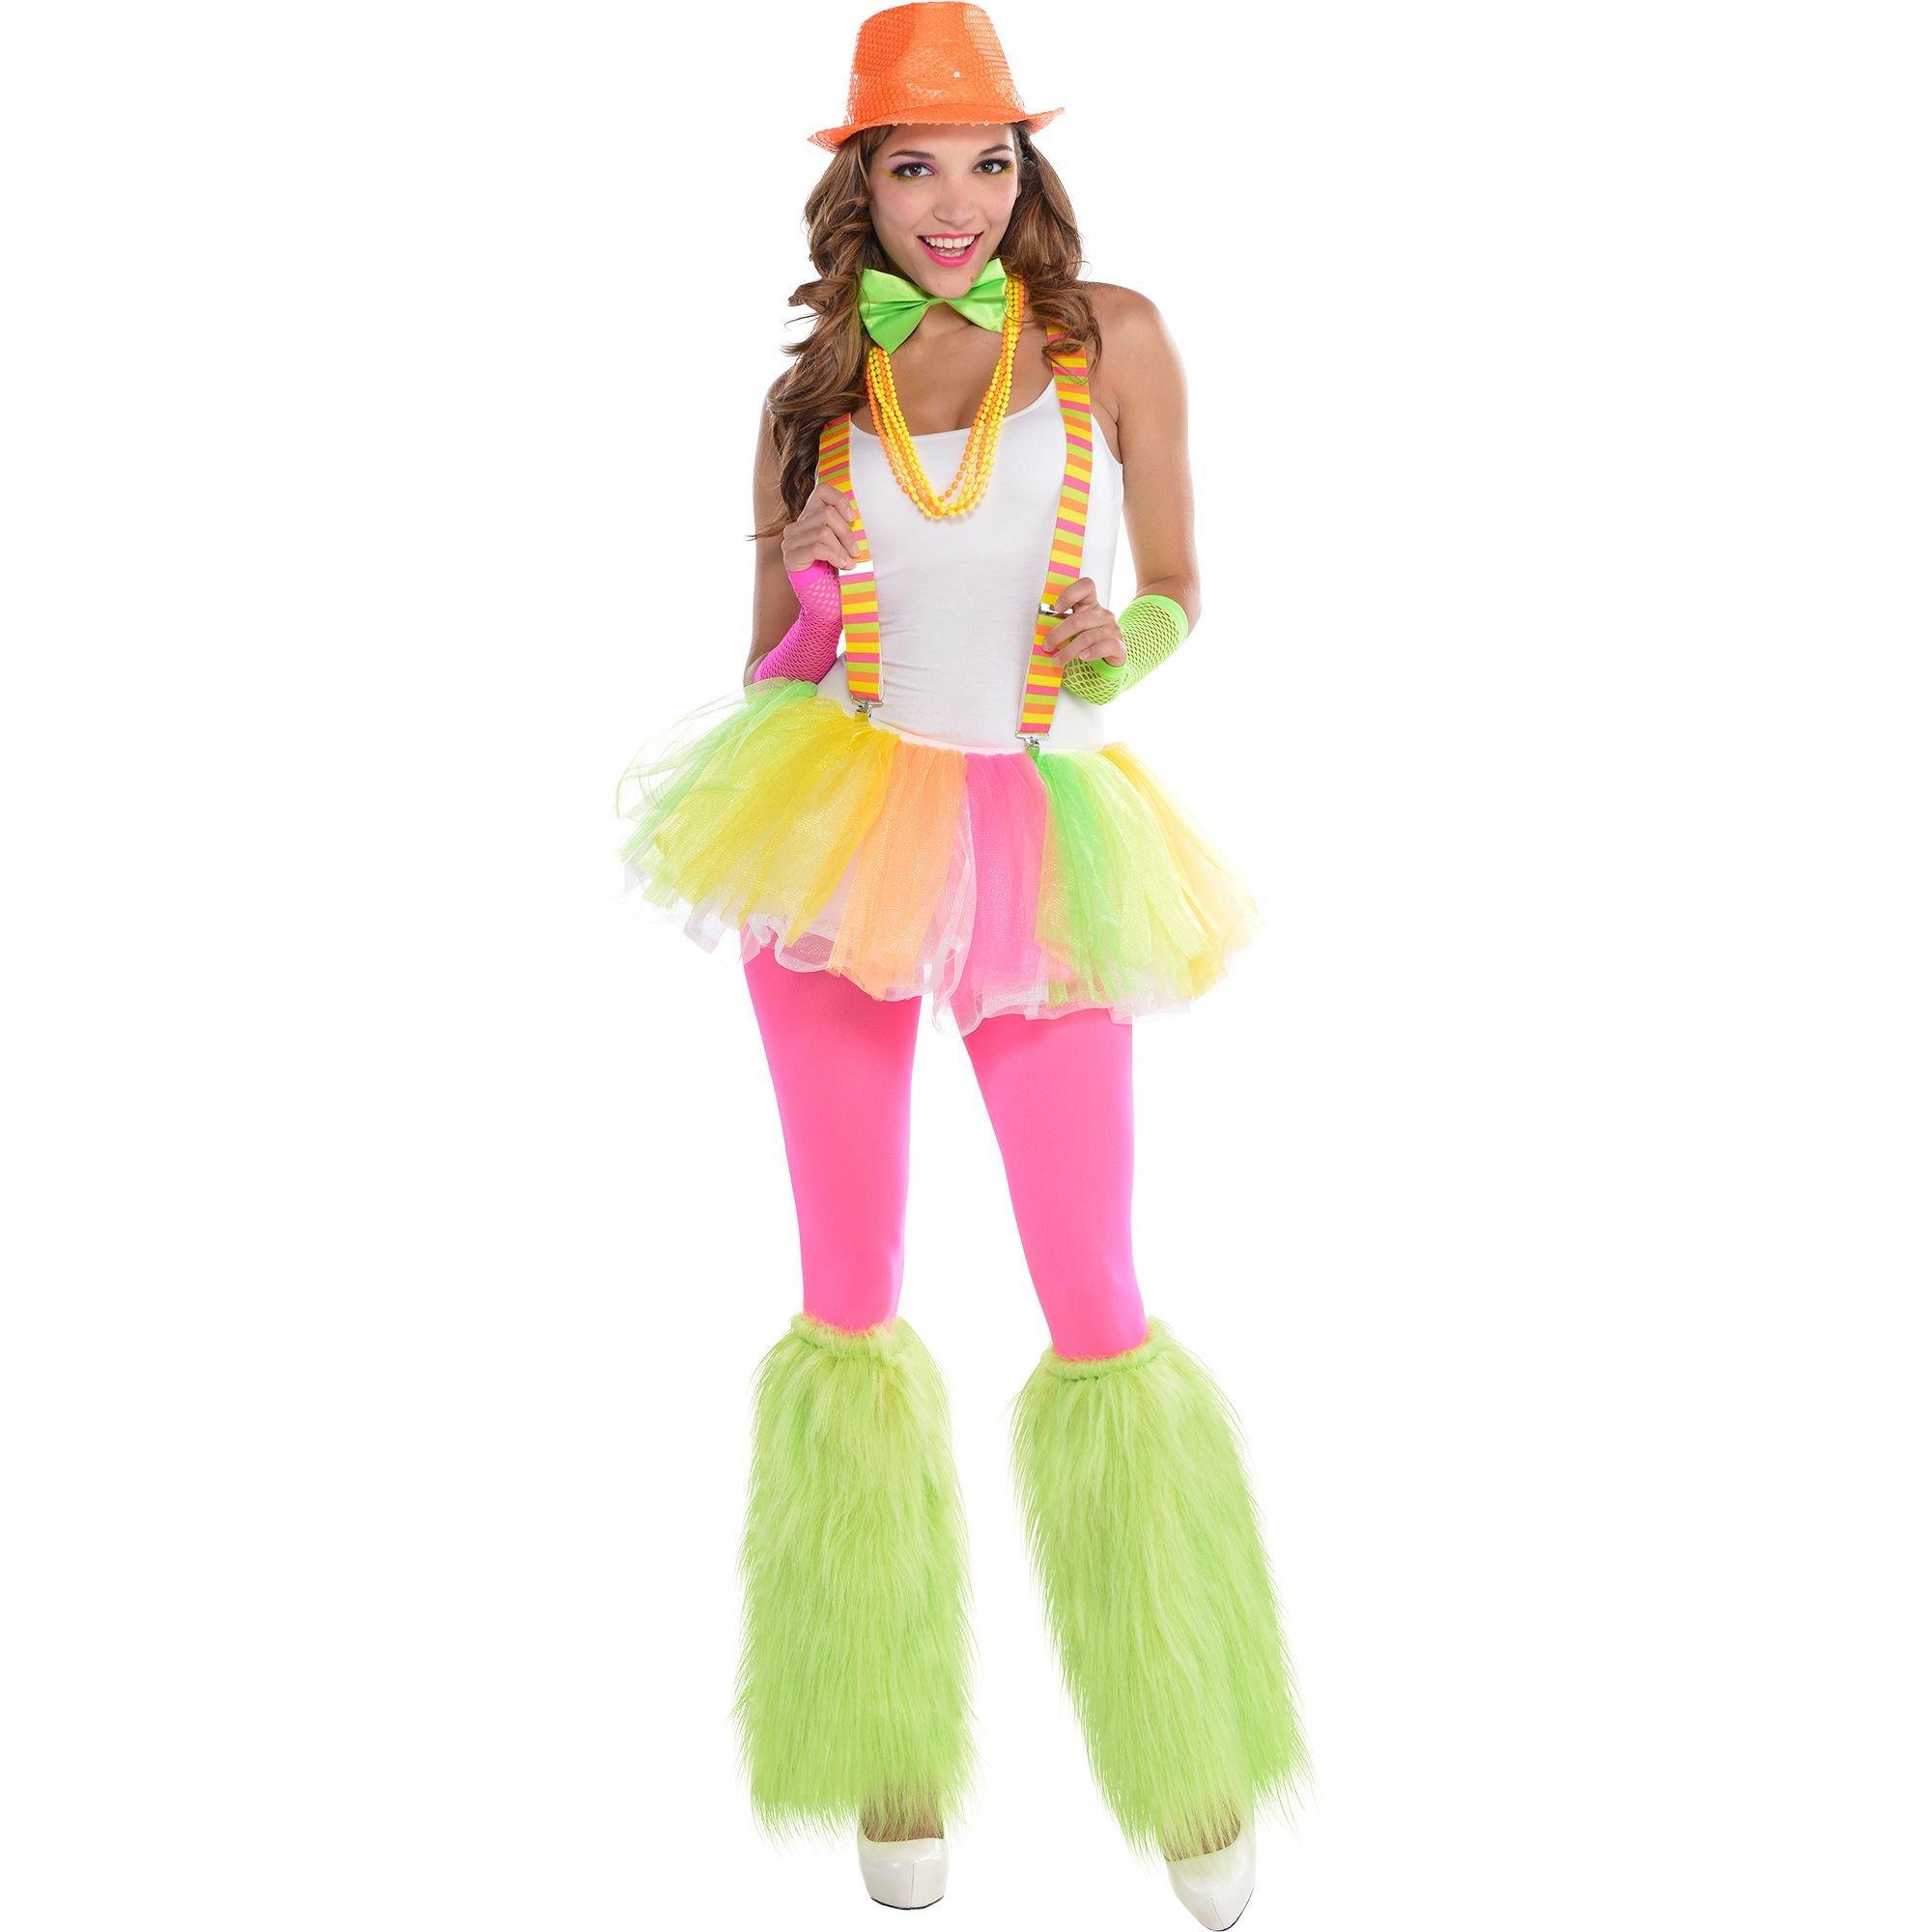 cute neon outfits